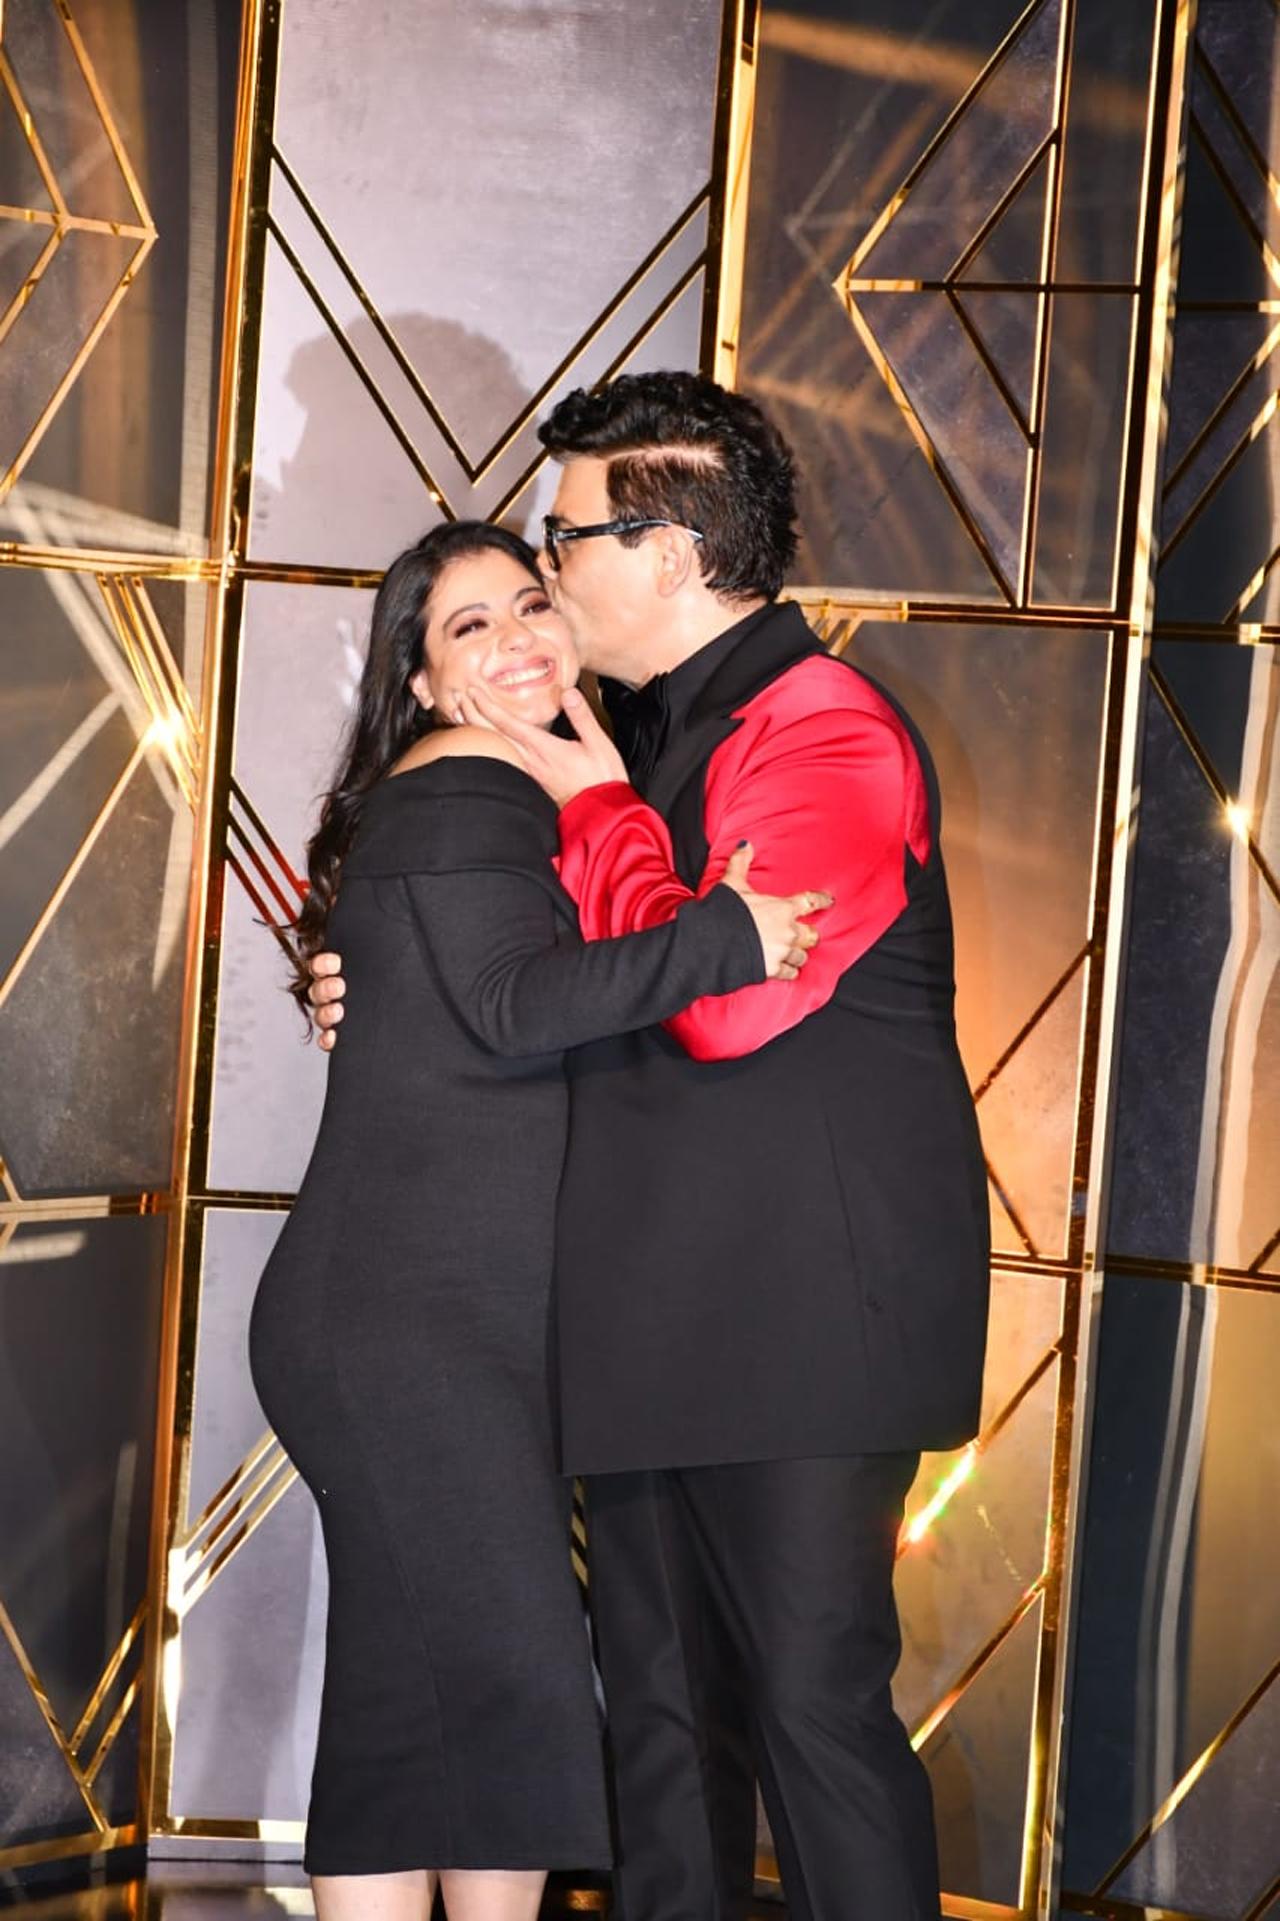 Kajol and Karan Johar stole the show with their endearing friendship in front of the paparazzi. Kajol was seen wearing a black gown for the celebration.